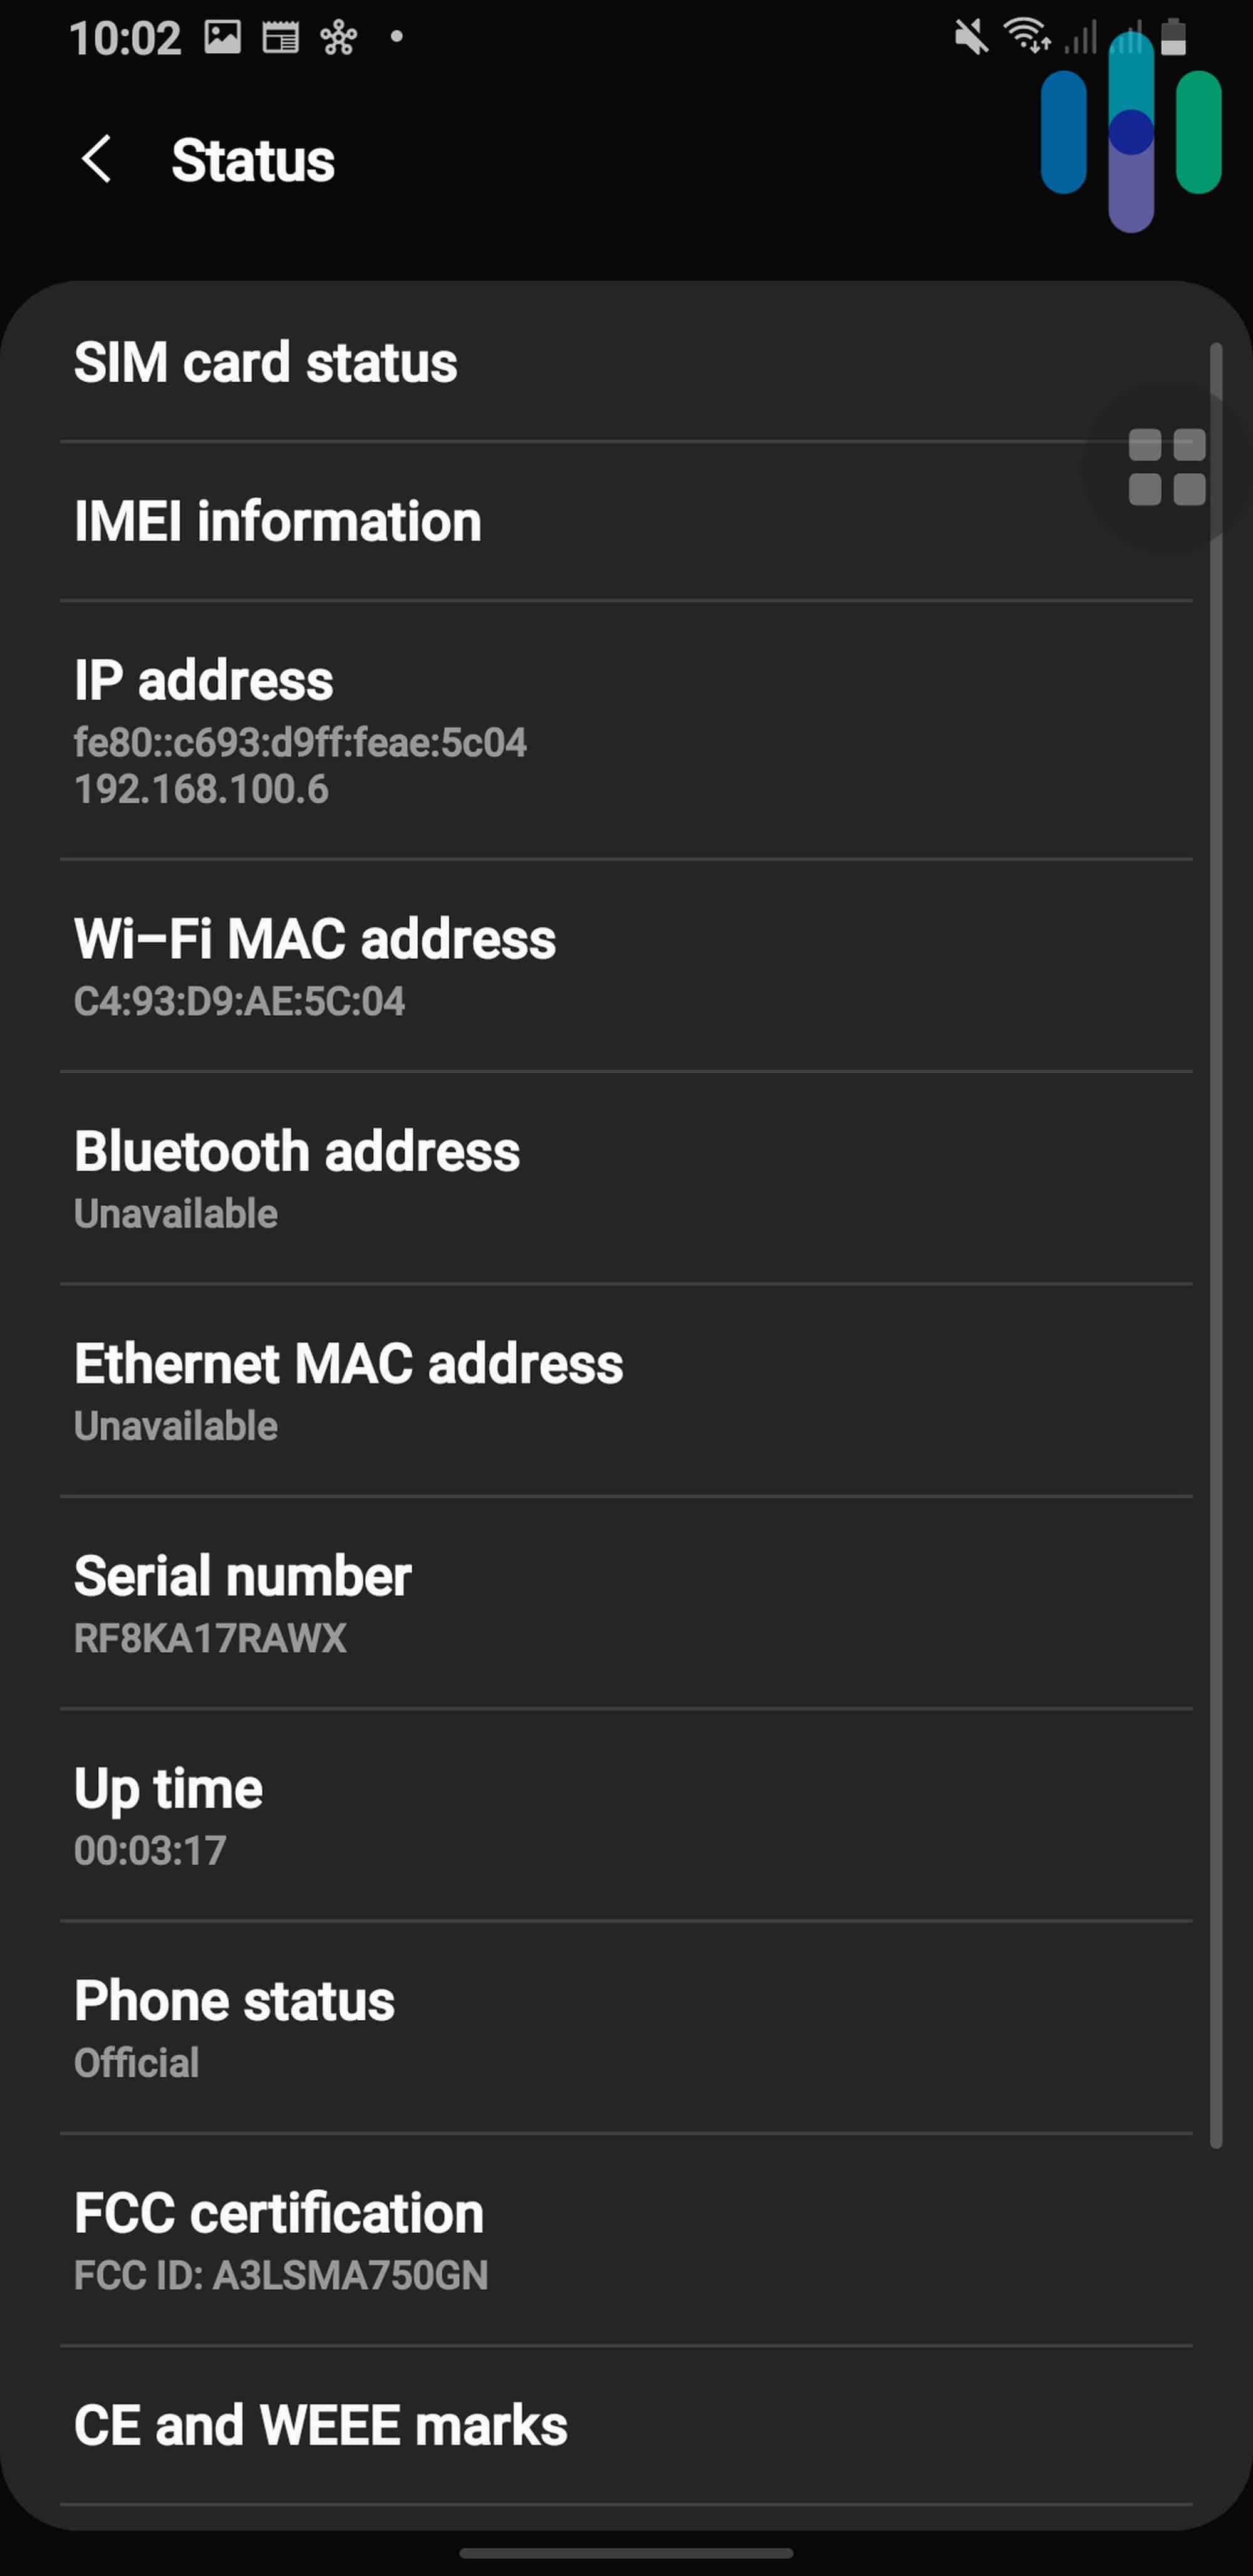 Changing You IP - On Android, Scroll to IP address to see your IP address.